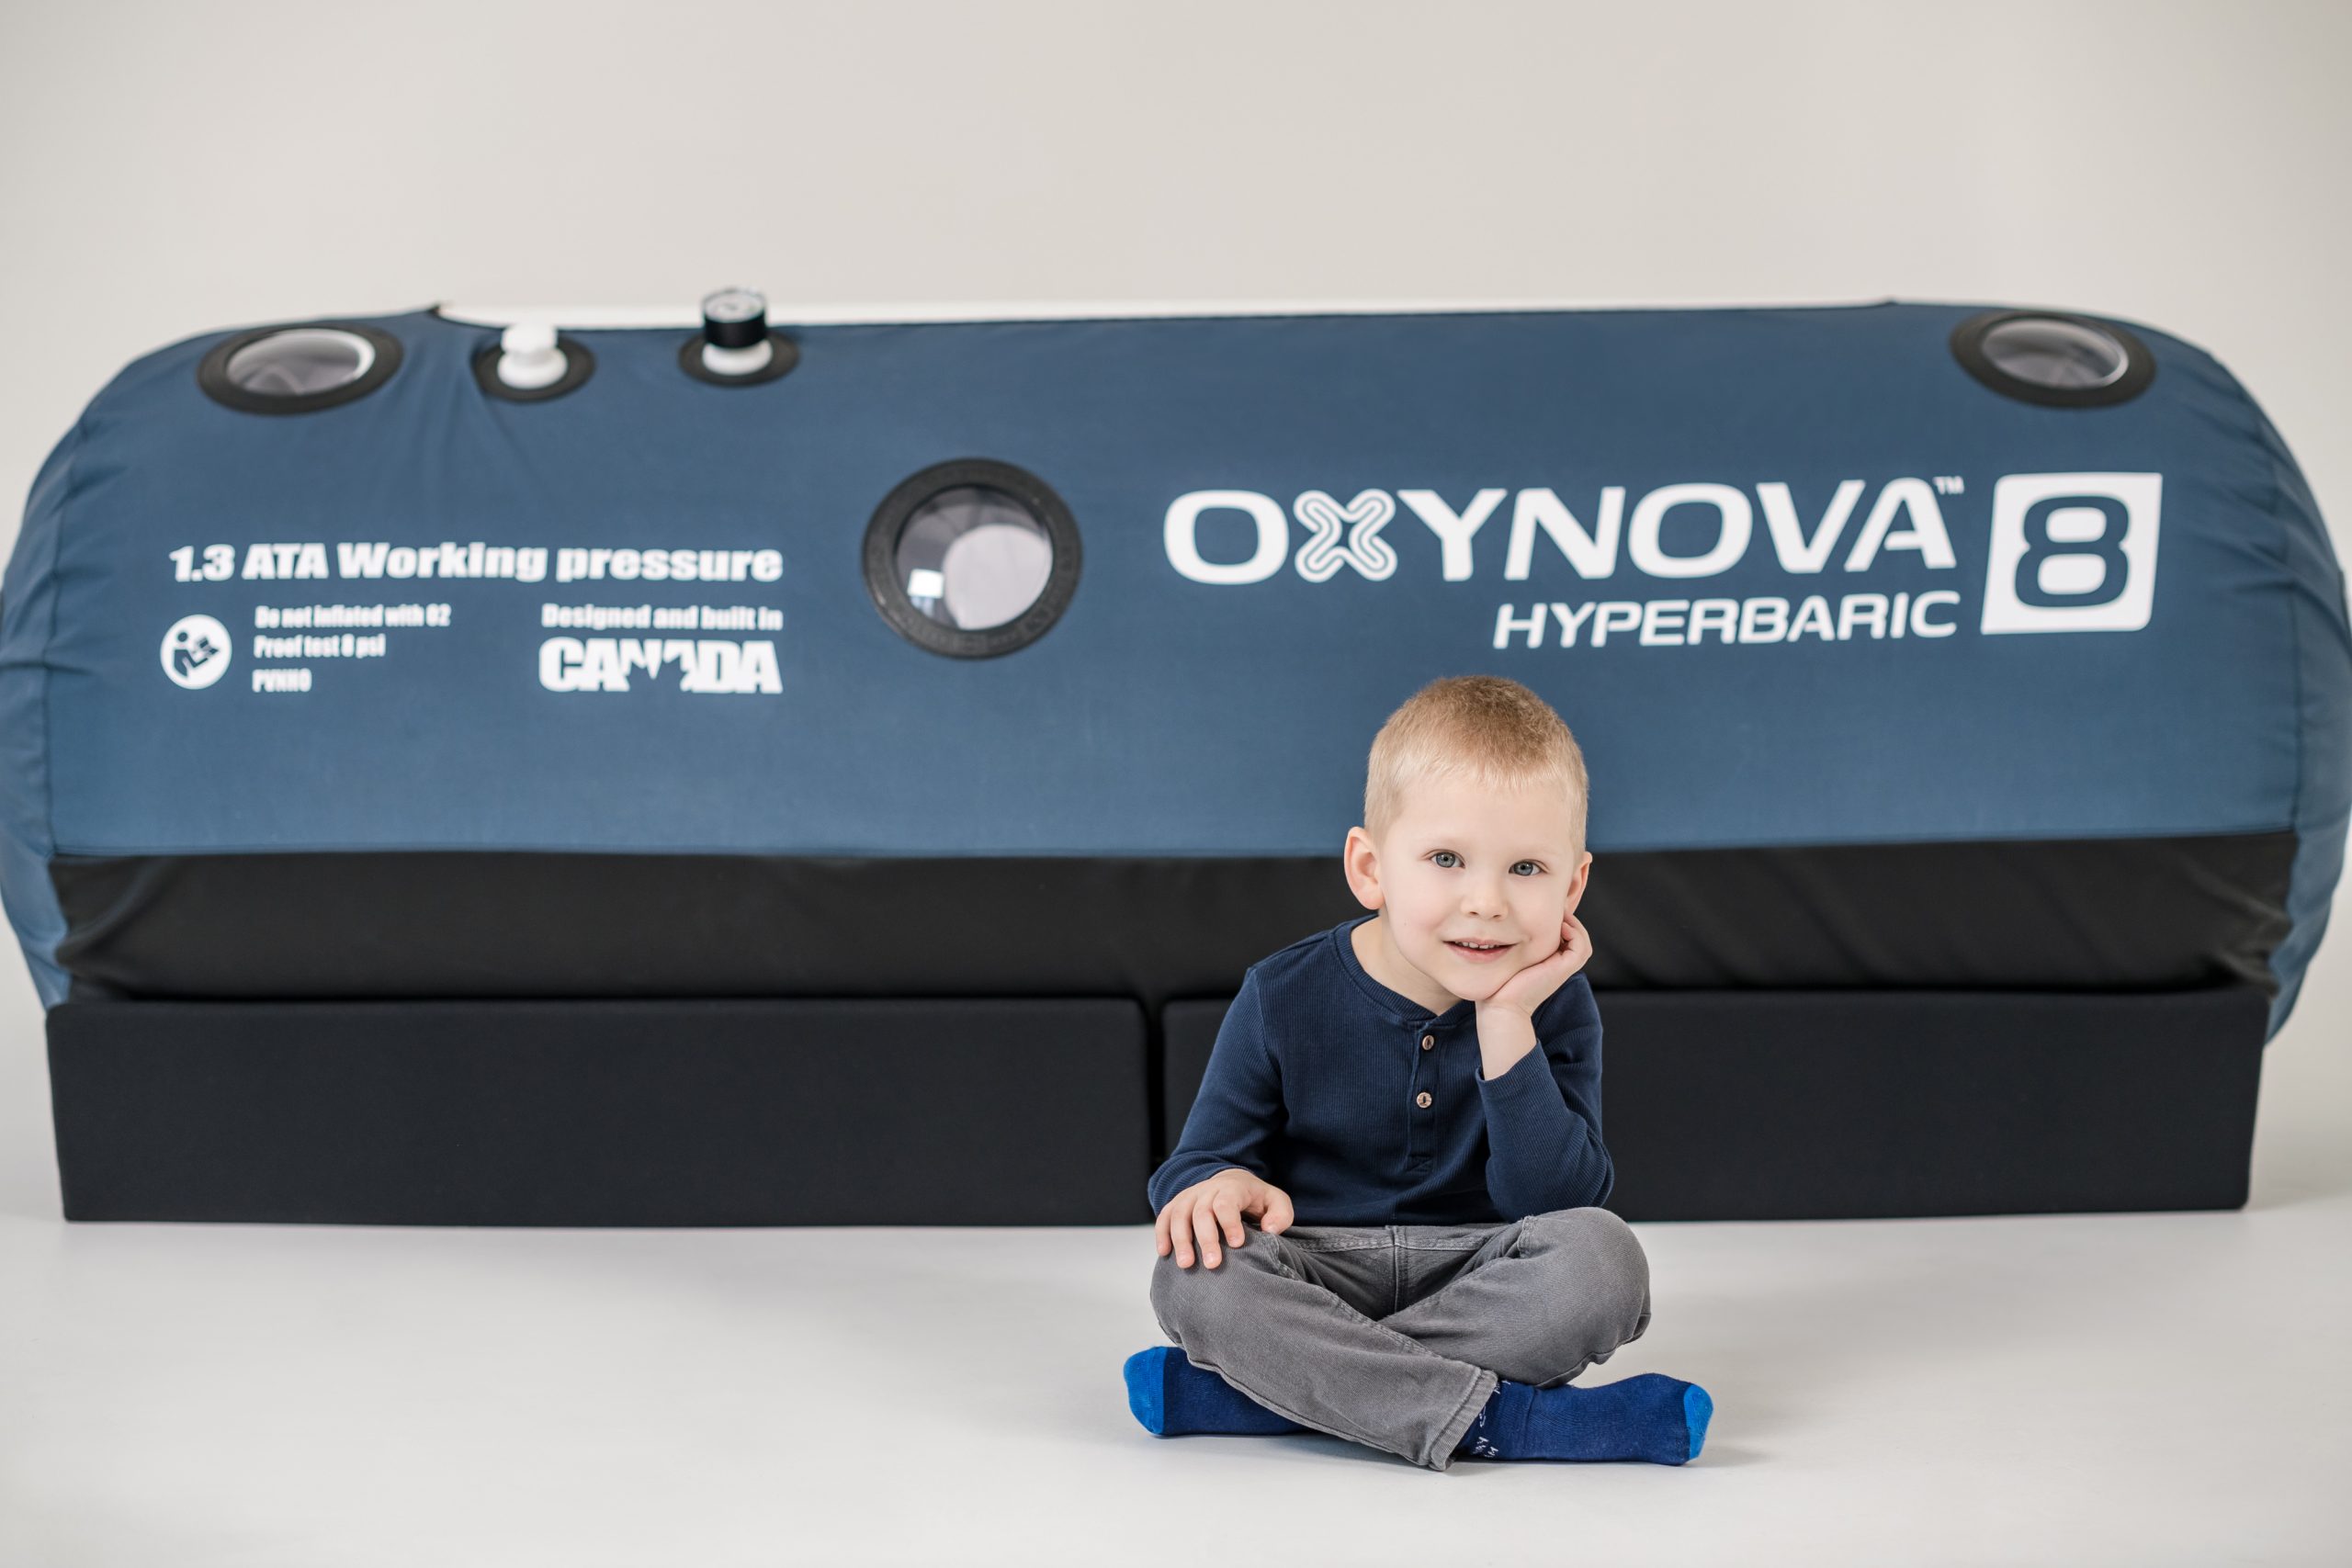 Mild hyperbaric therapy may improve symptoms in autistic children